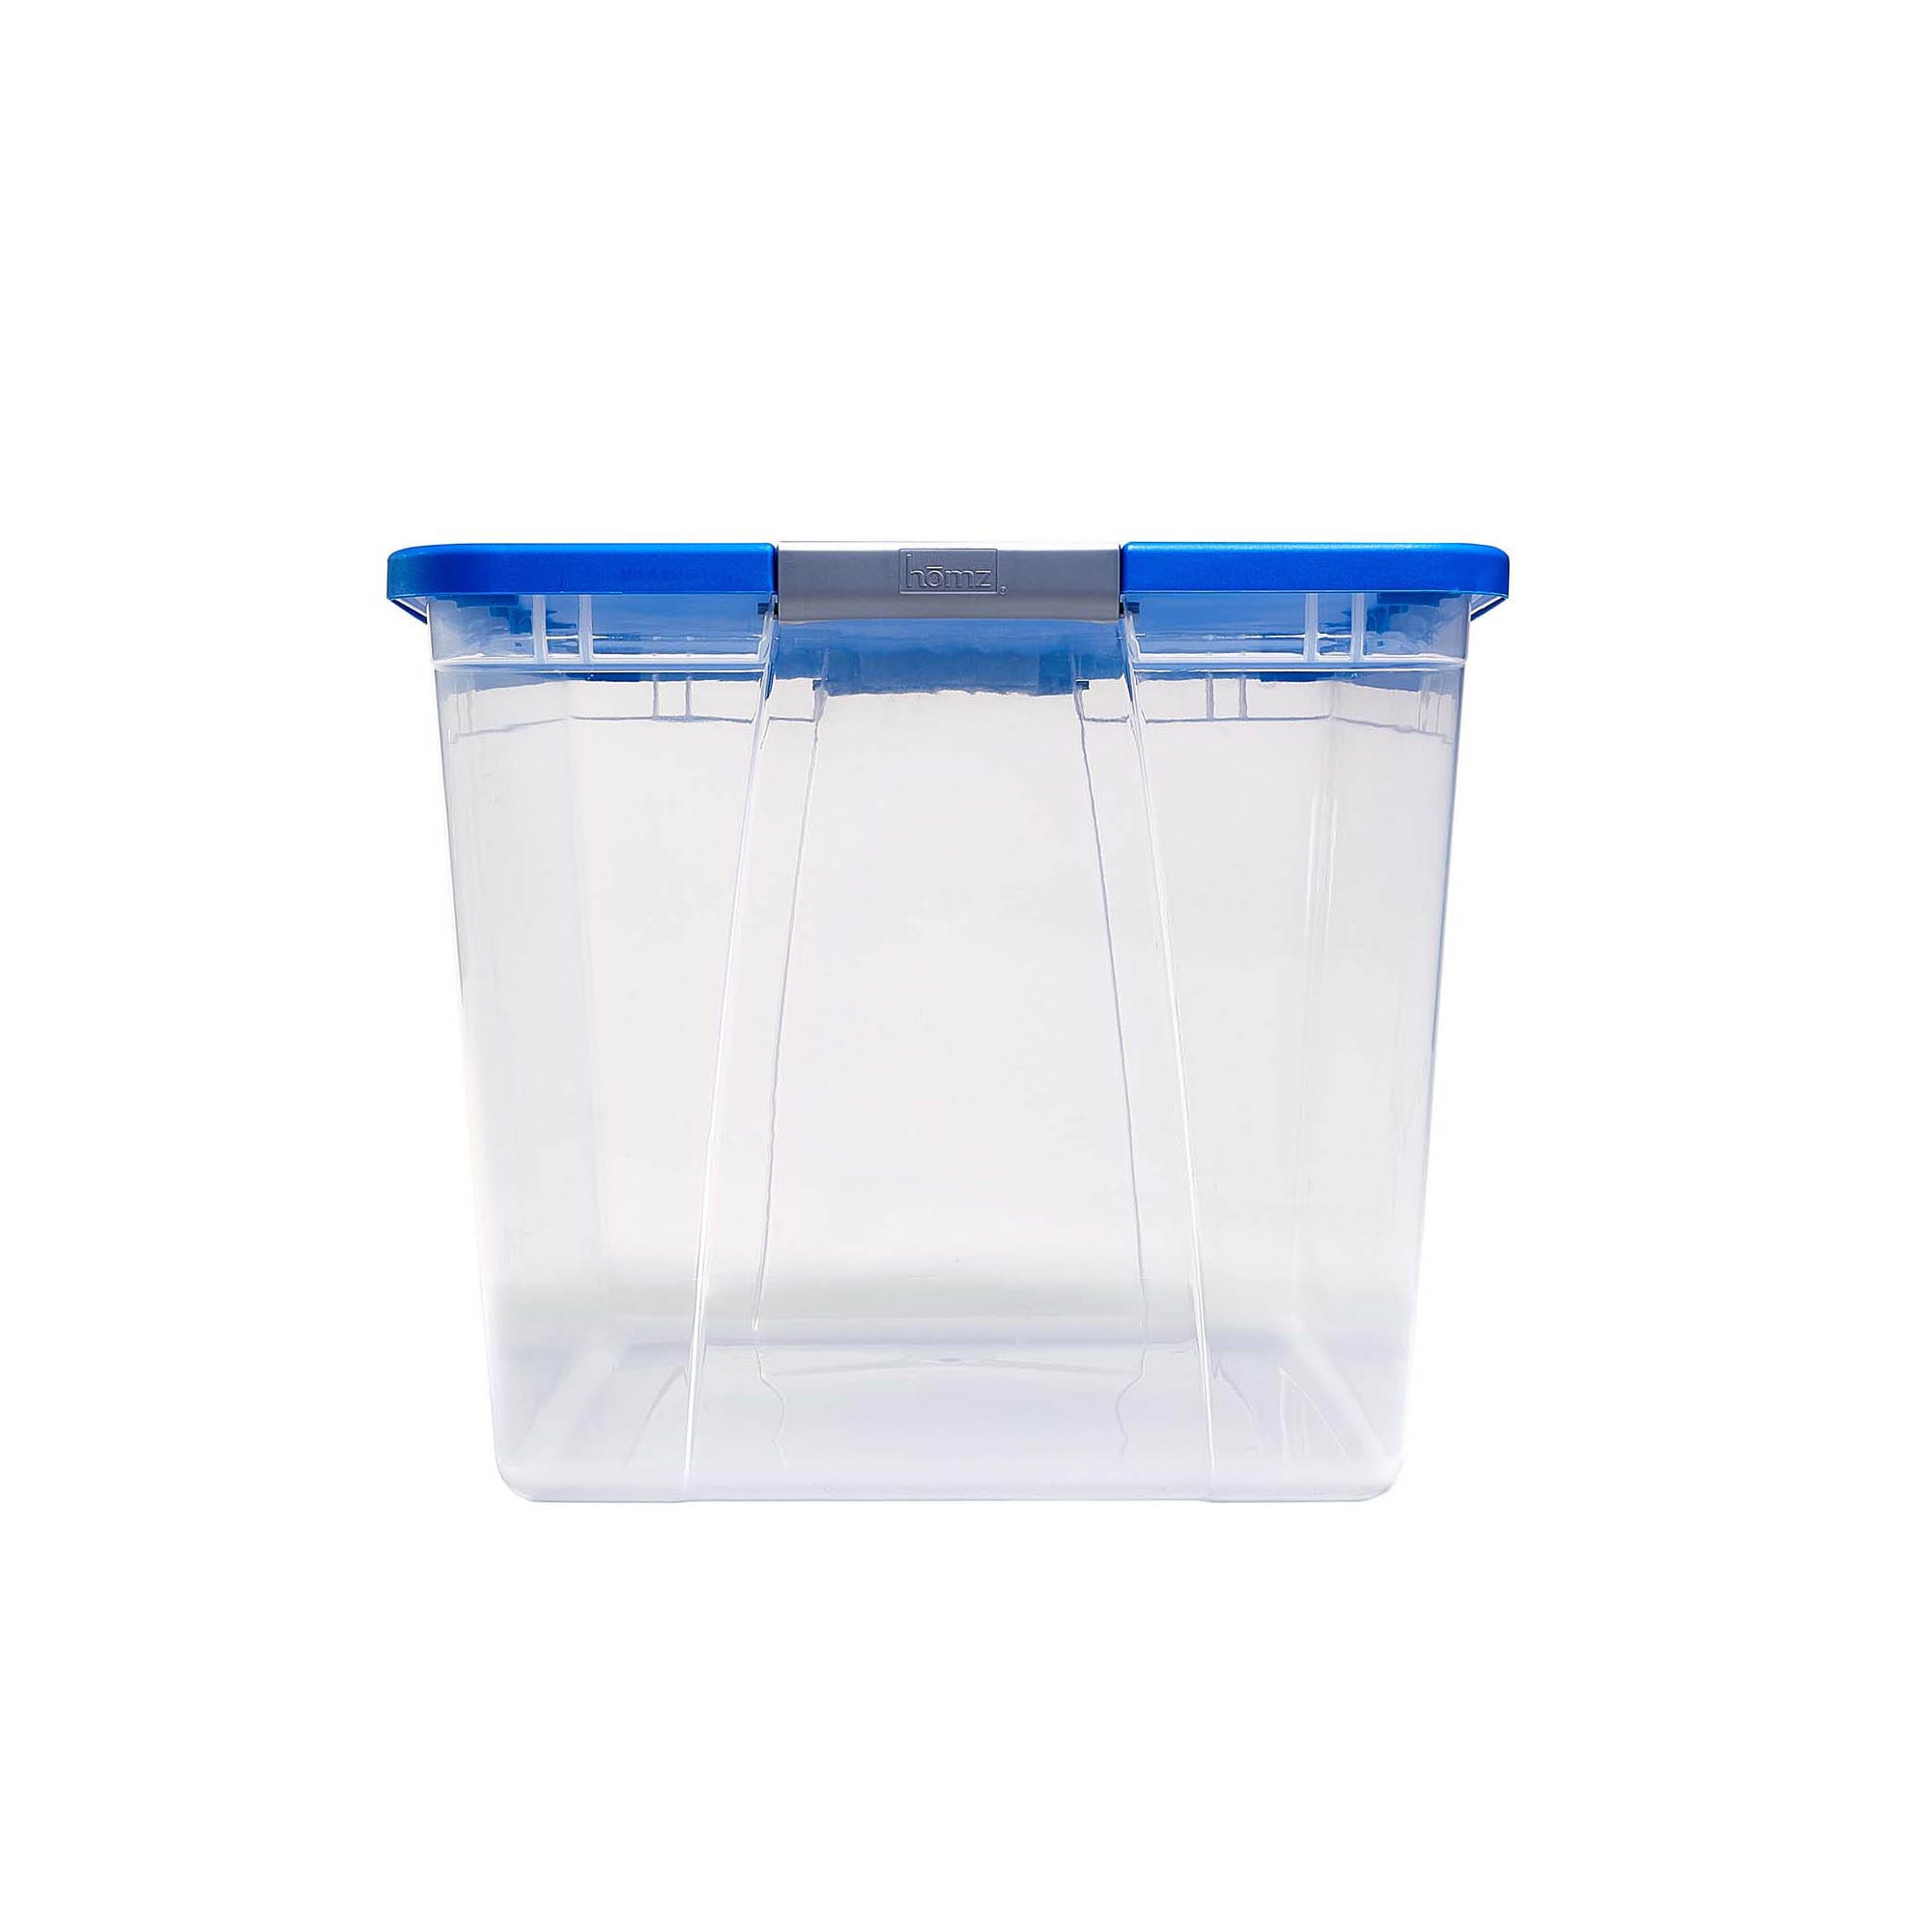 Homz 64 Qt Clear Storage Organizing Container Bin with Latching